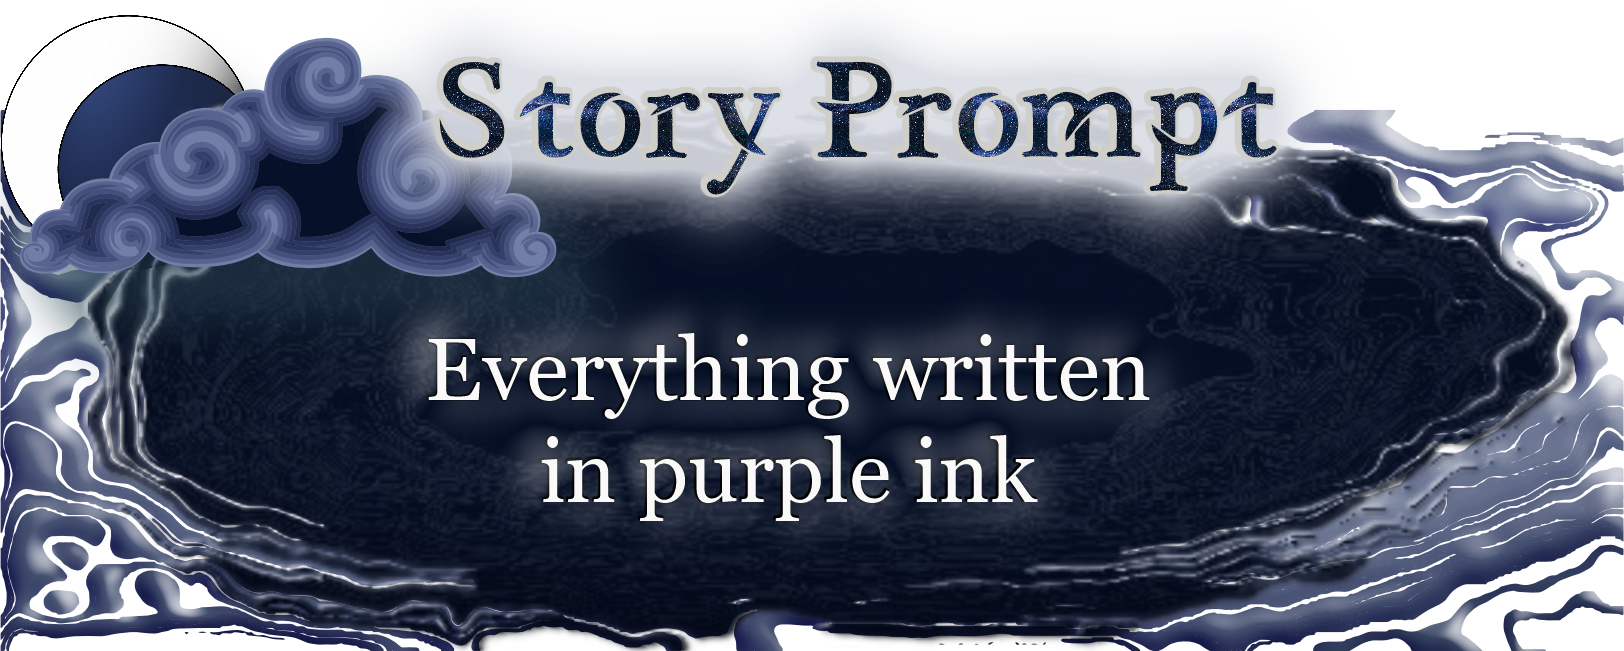 Author Jenna Eatough's Flash Fiction Story from writing prompt: Everything written in purple ink